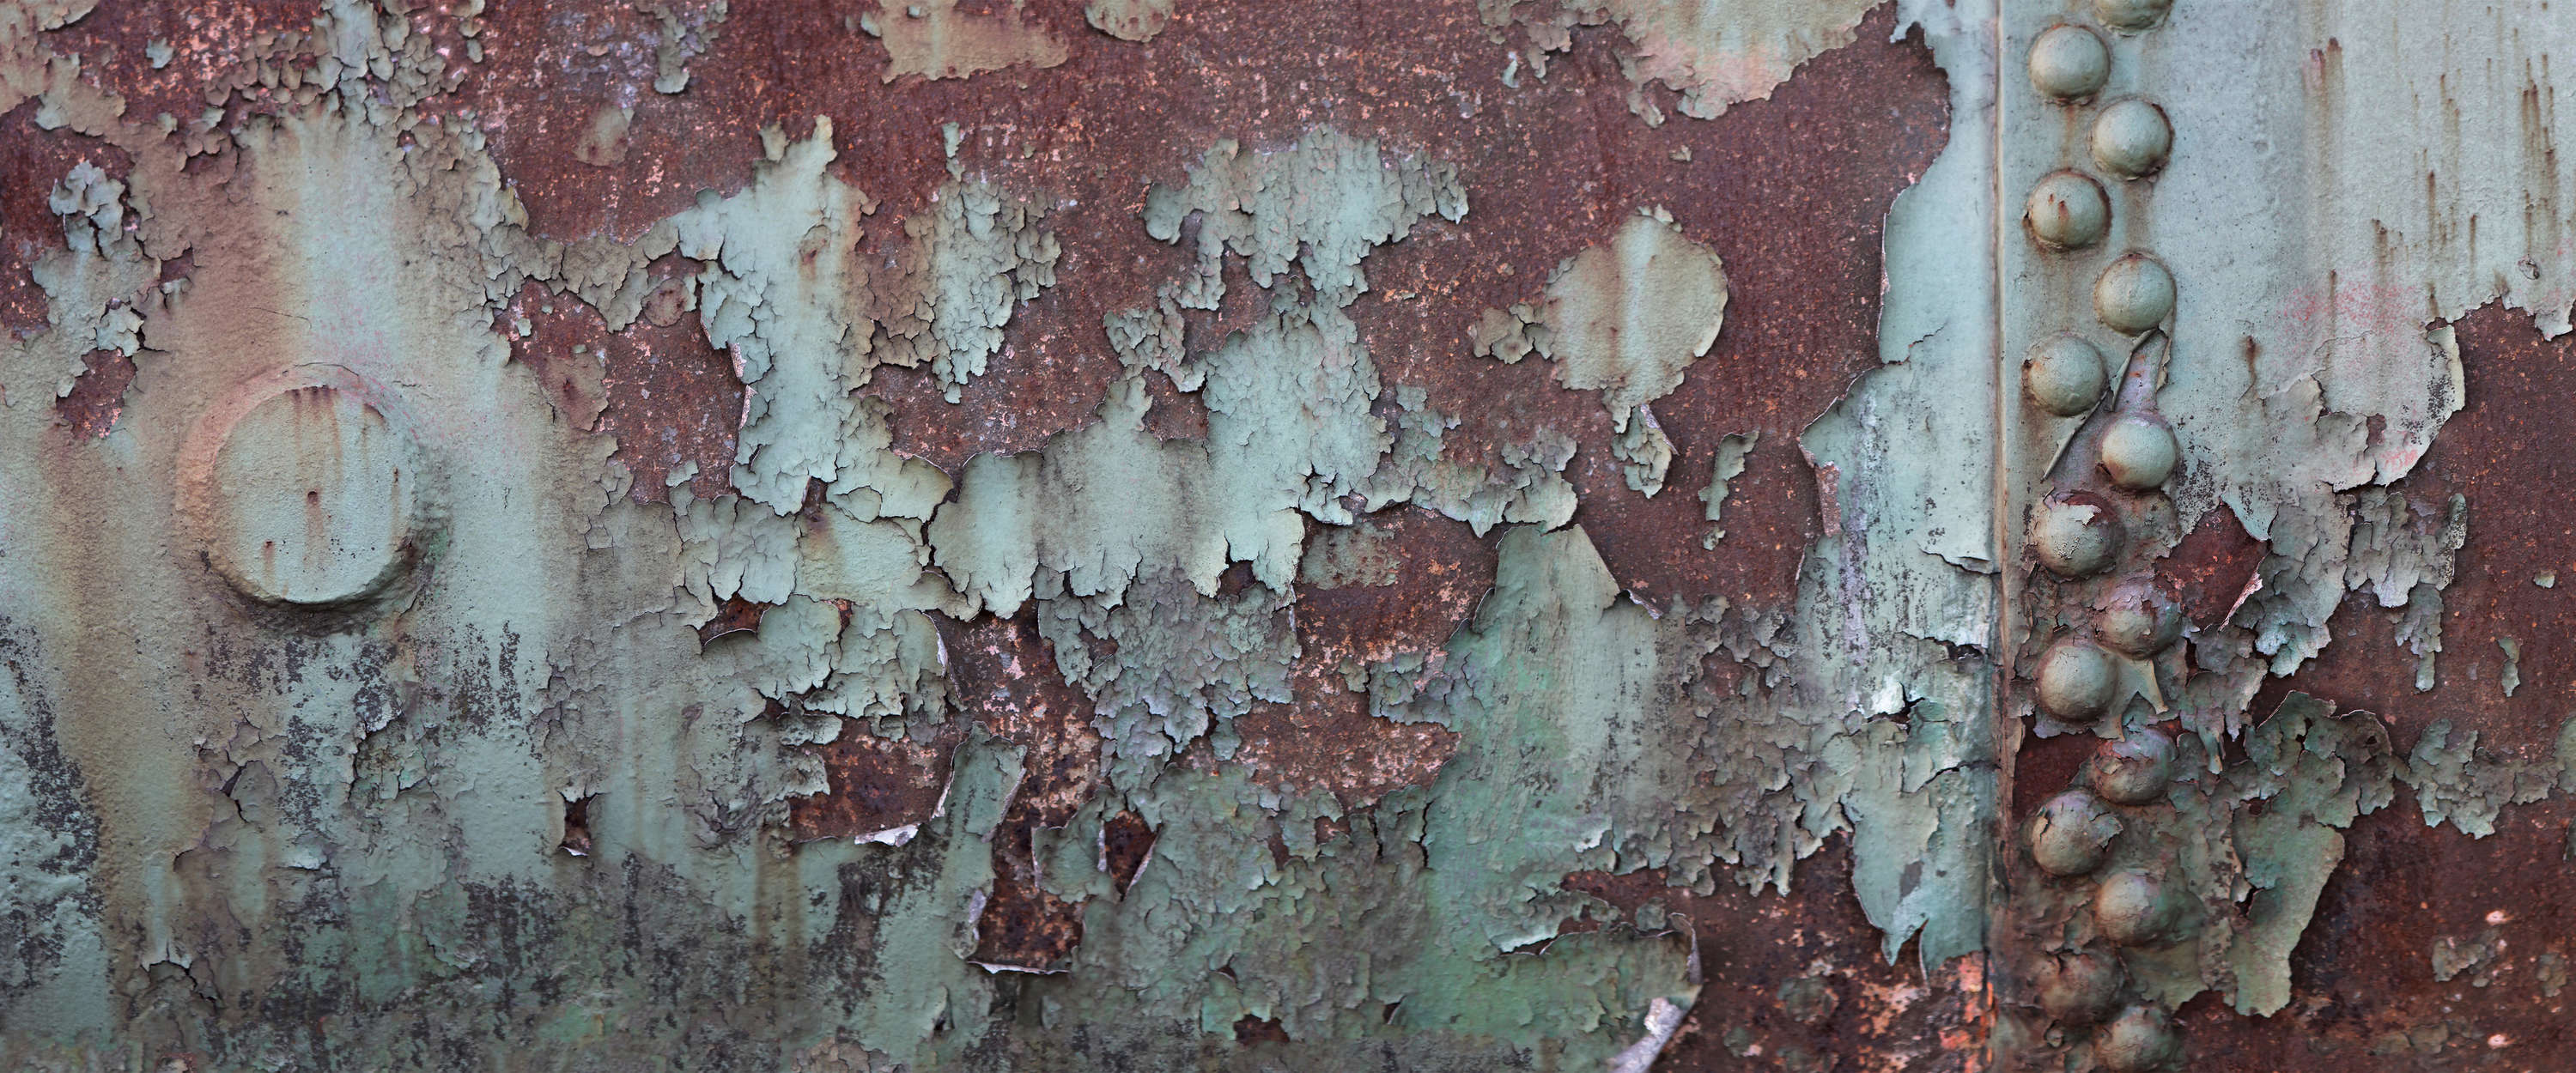             Photo wallpaper corroding ship wall - metal plate with rust
        